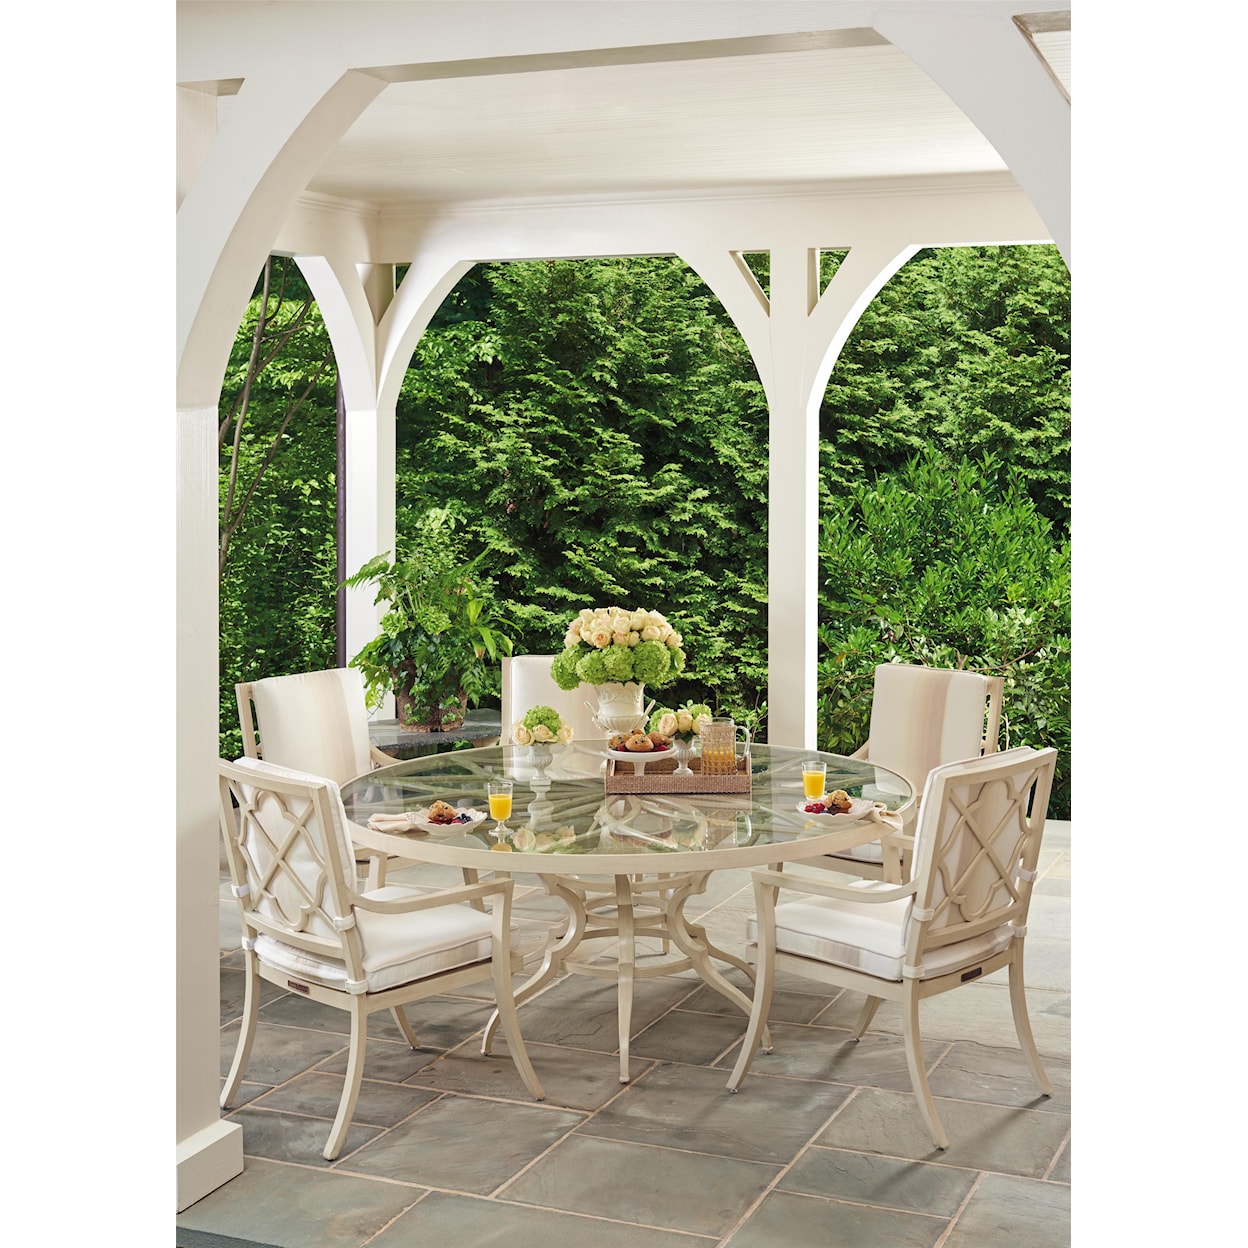 Tommy Bahama Outdoor Living Misty Garden Round Dining Table w/ Glass Top